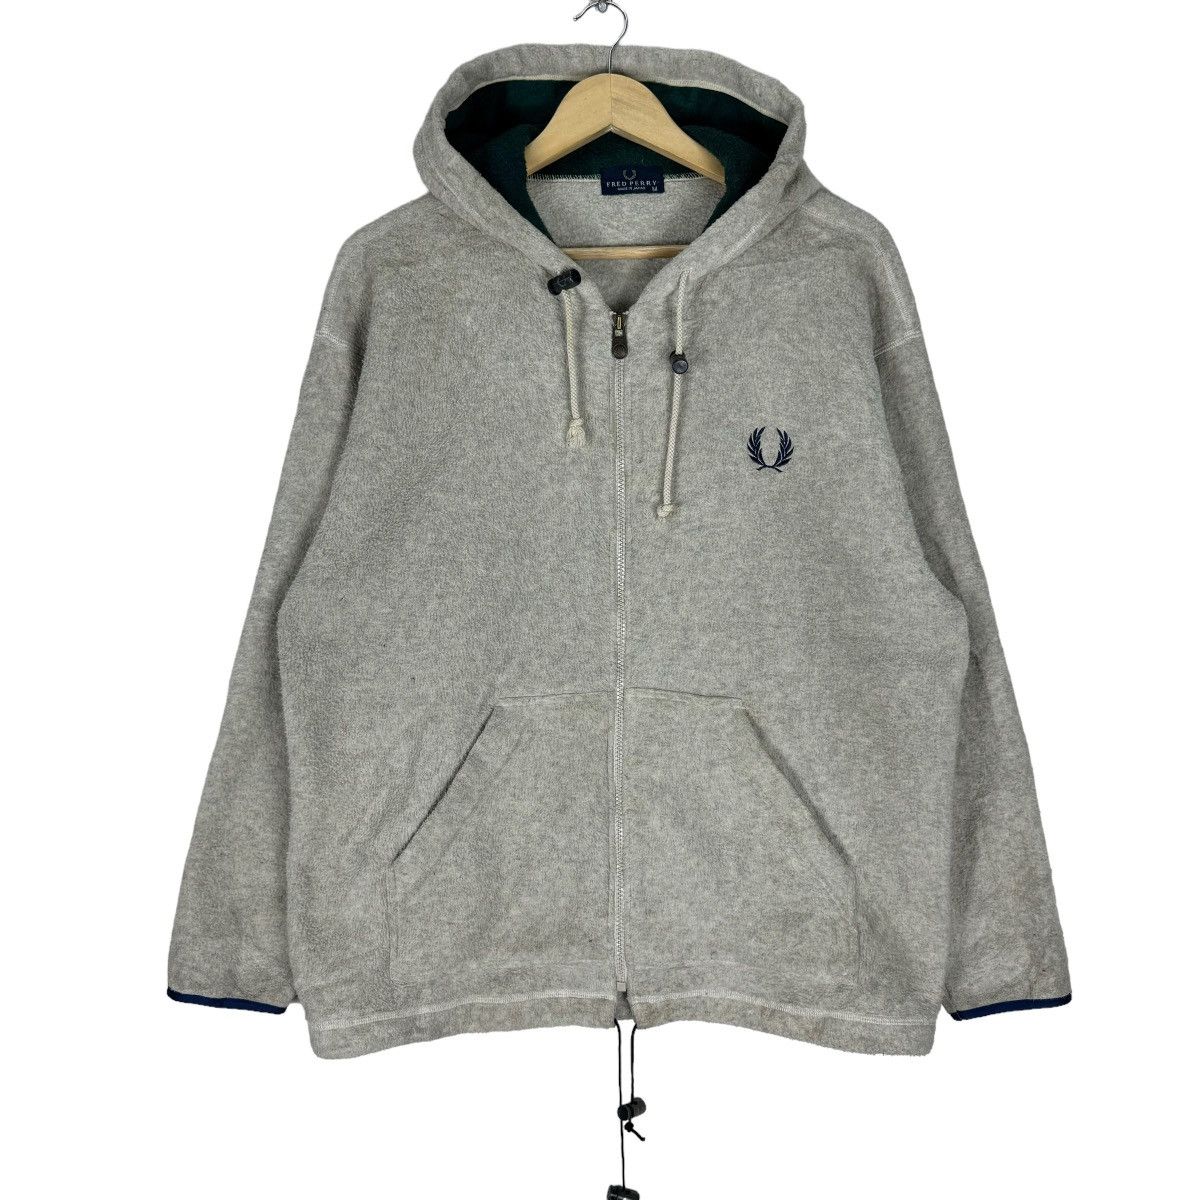 ❄️FRED PERRY HOODIE FLEECE SWEATER - 1